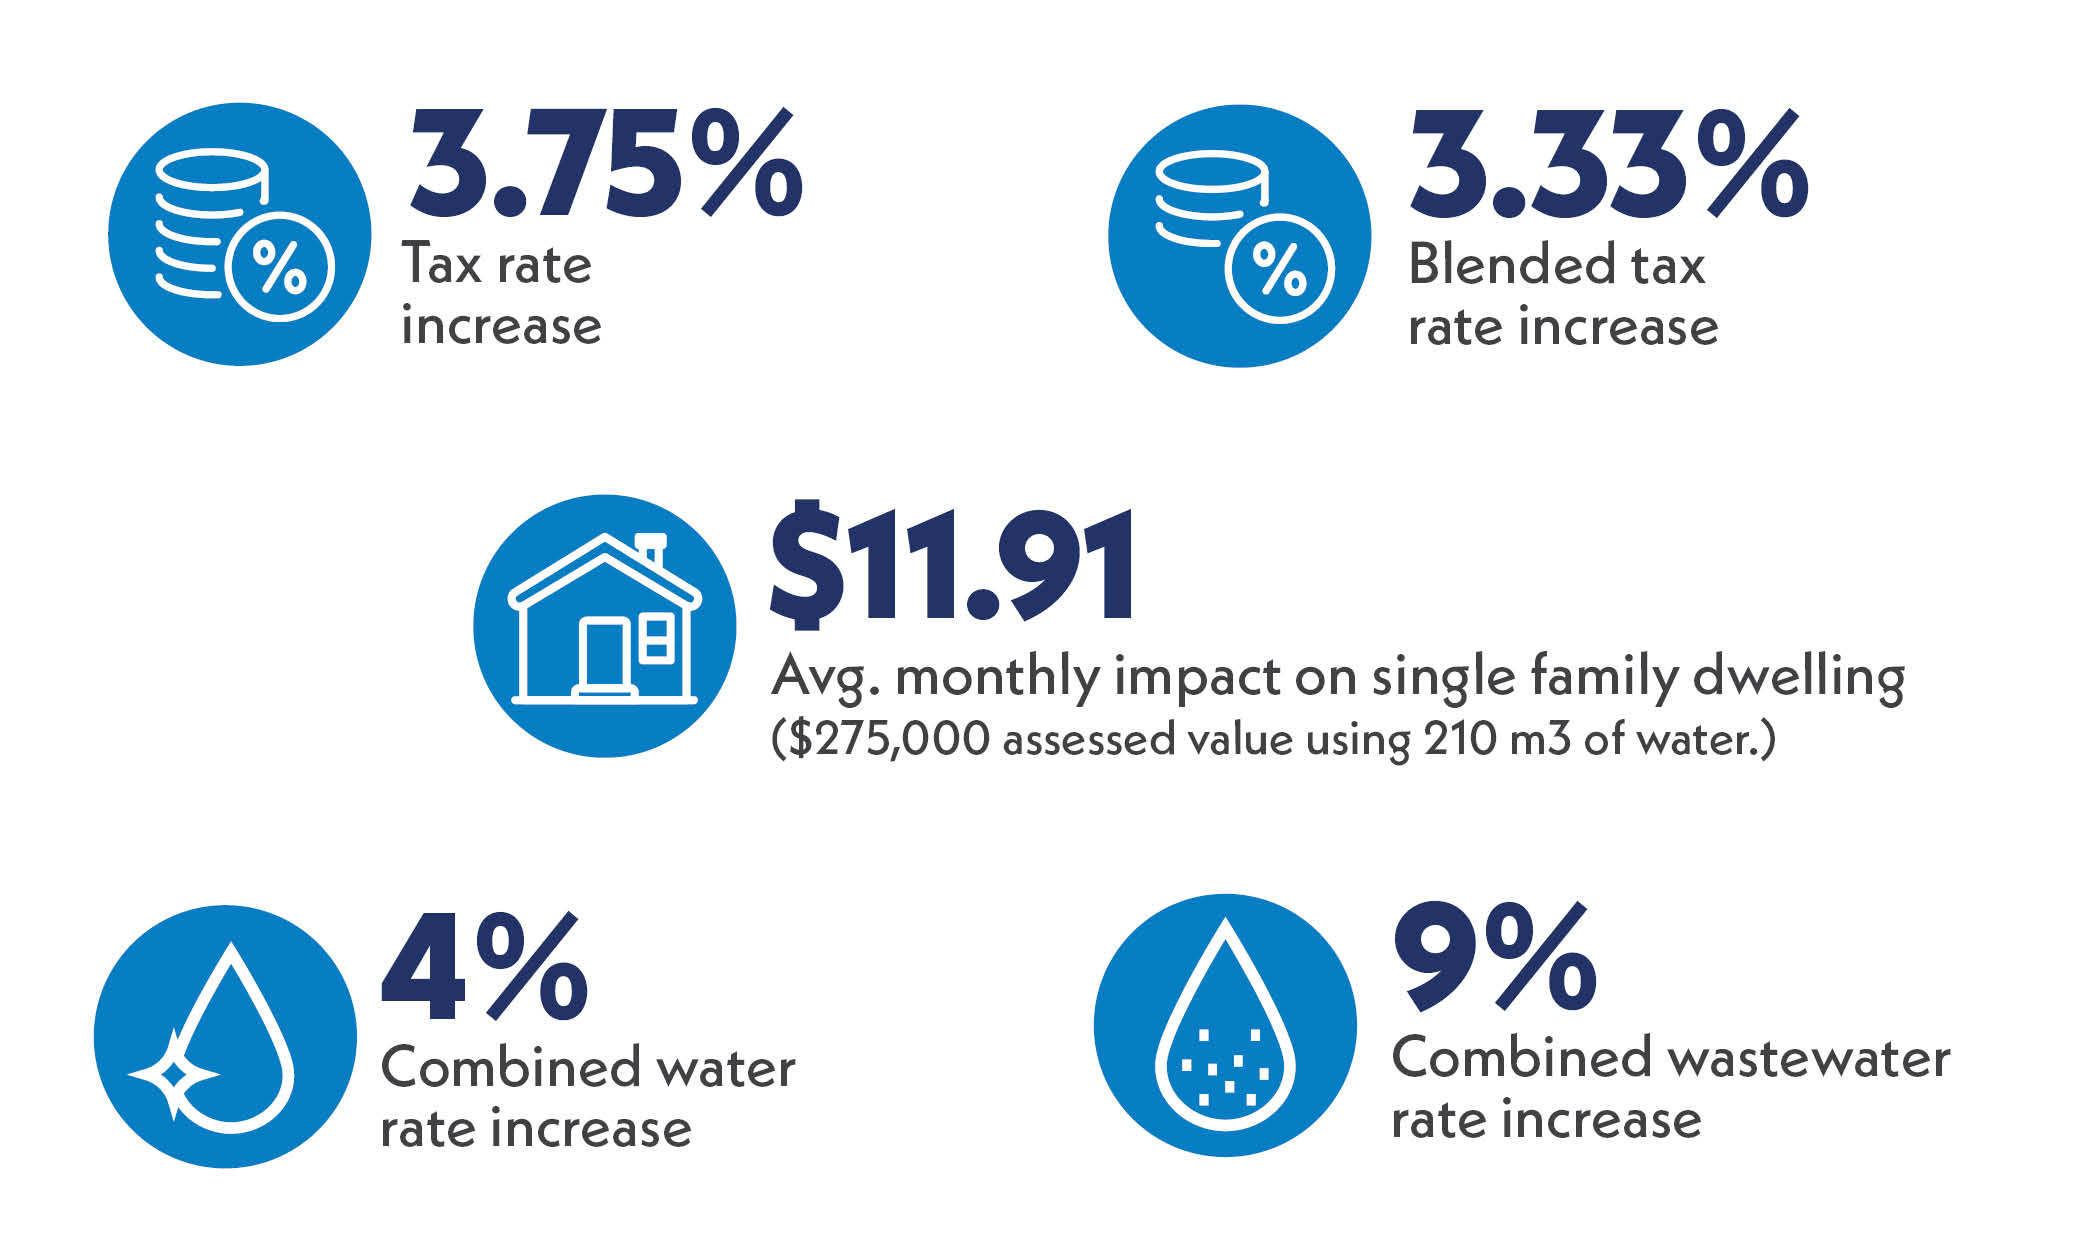 5 icon graphic showing the %3.75 tax rate increase, 3.33% blended rate, 9% wastewater rate increase, 4% water rate increase and $11.91 average monthly impact on single family dwelling.